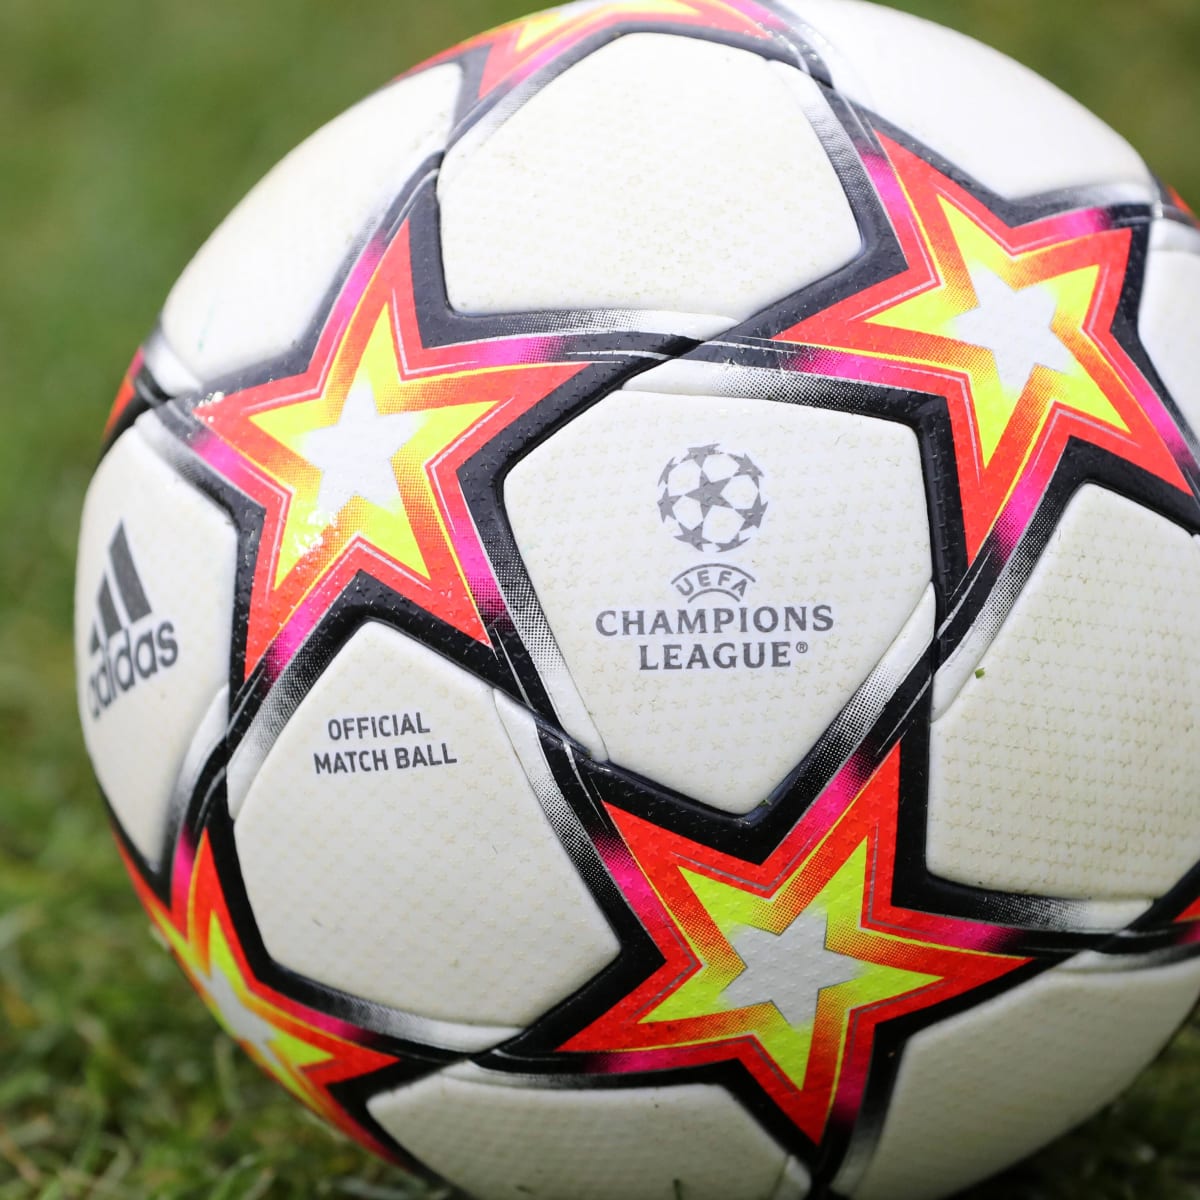 Champions League last 16 schedule: CBS to air matches on Illustrated